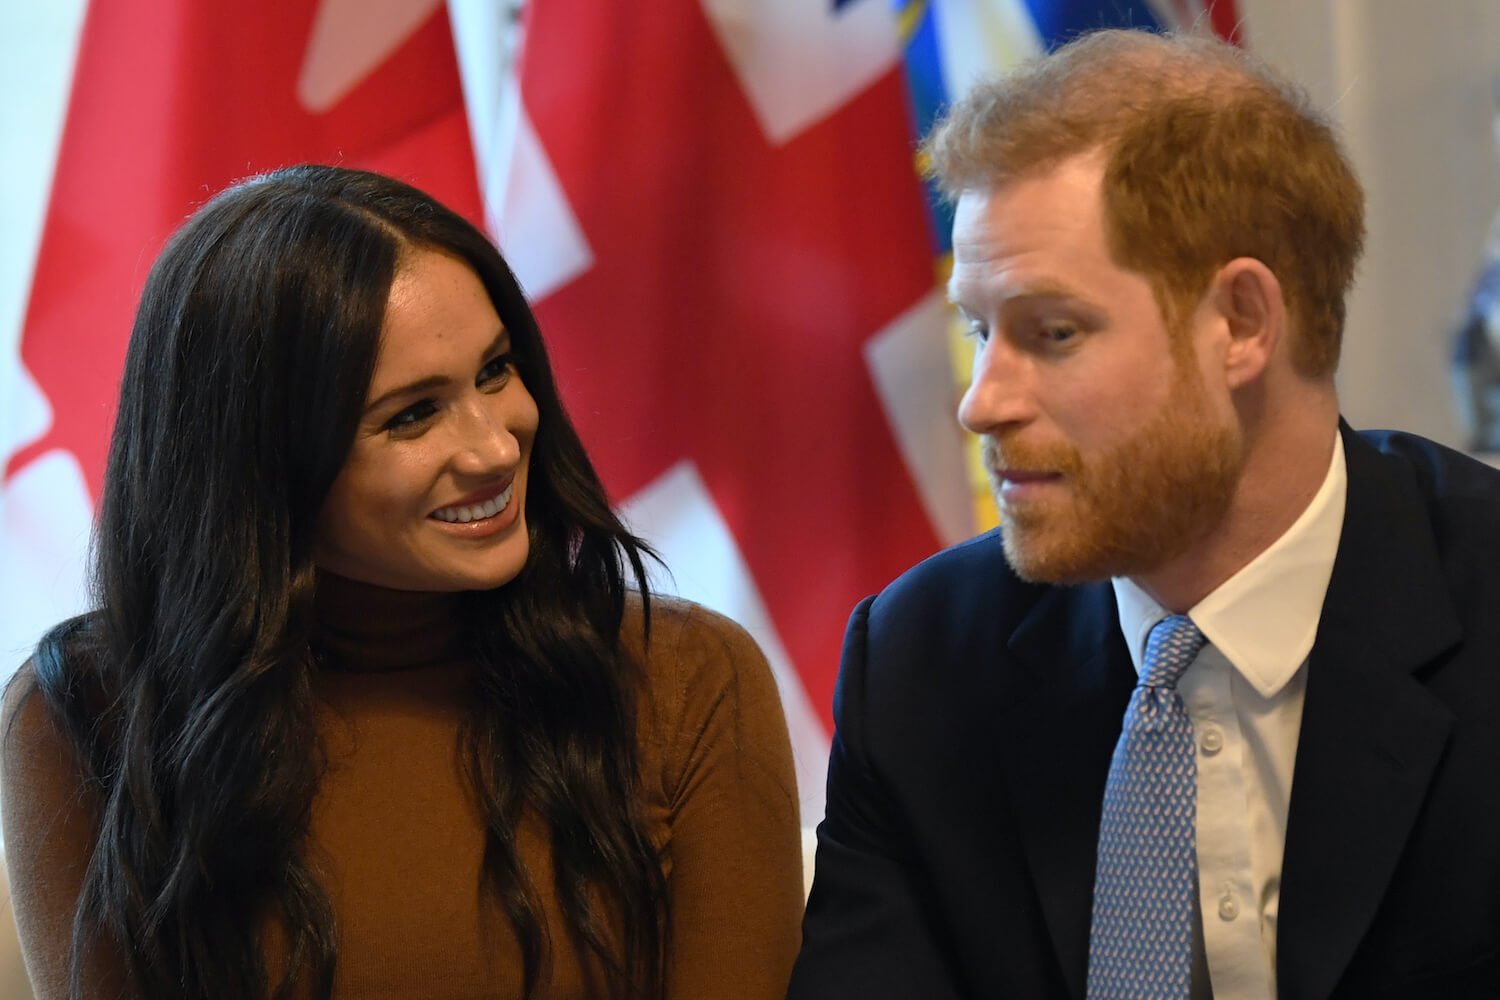 Prince Harry Says Meghan Markle Saved Him From Being ‘Stuck’